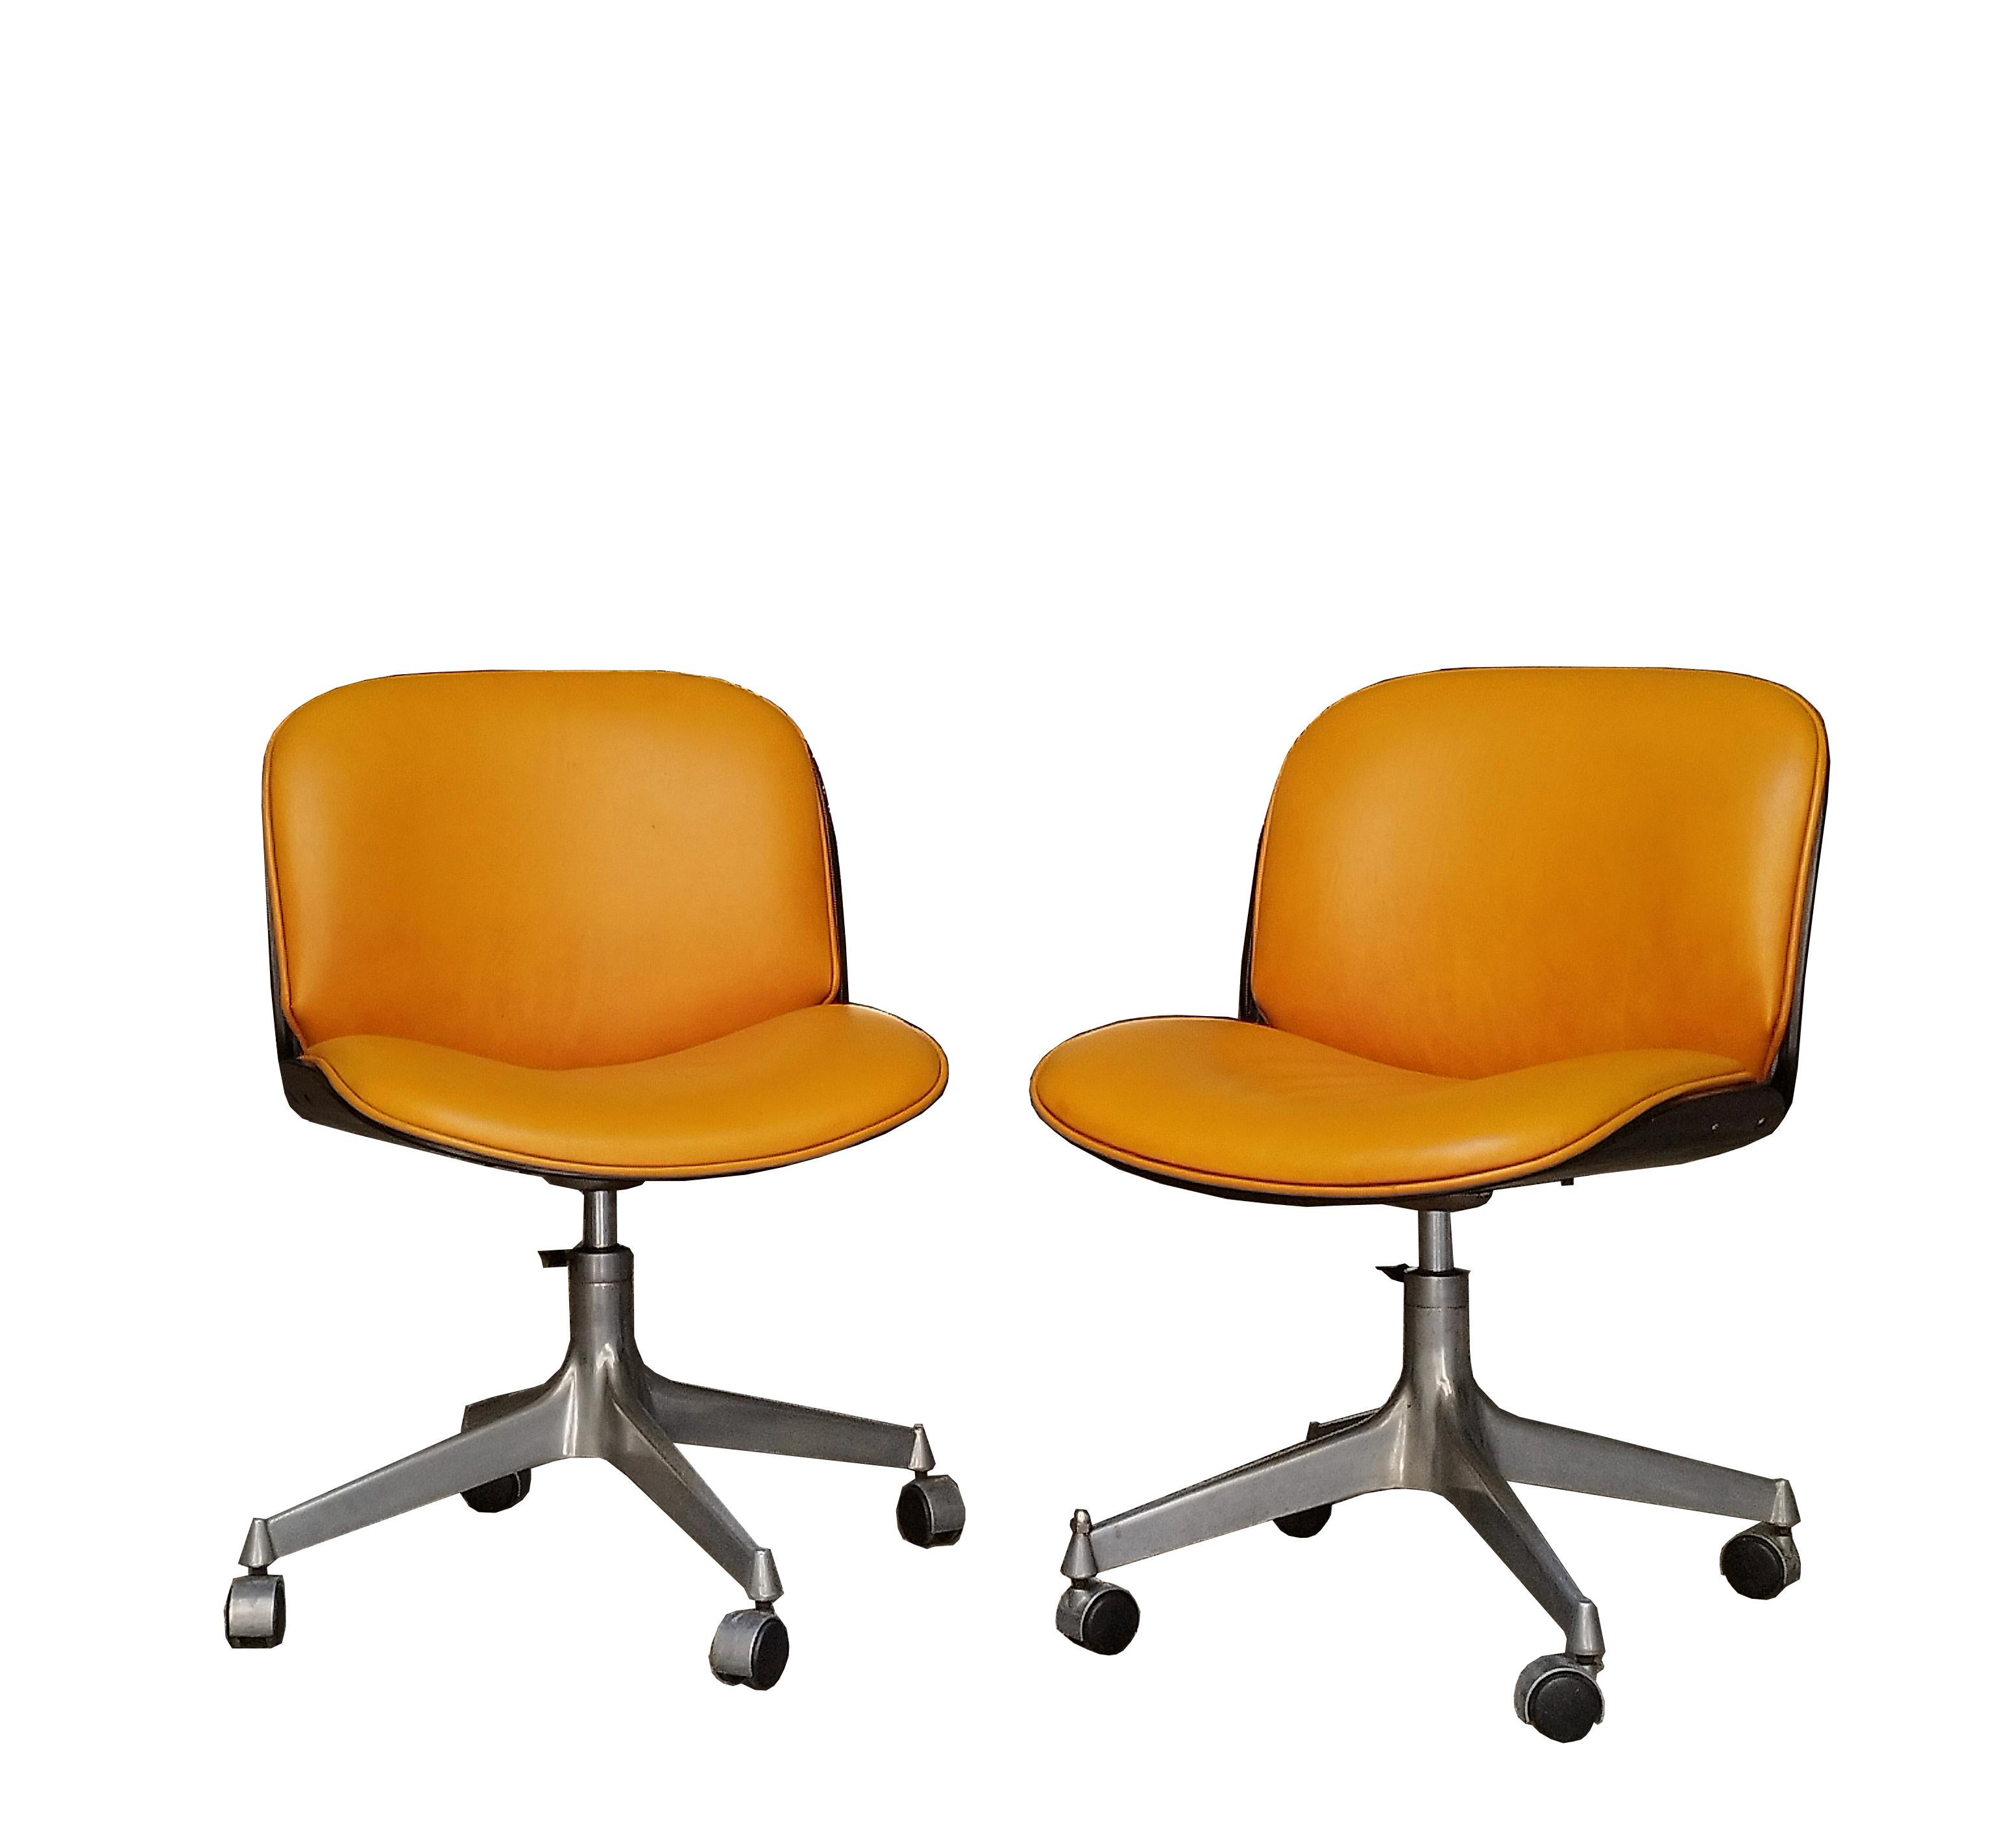 Mid-20th Century Ico Parisi for Mim Roma Desk, an Executive Armchair and a pair of Swiwel Chairs